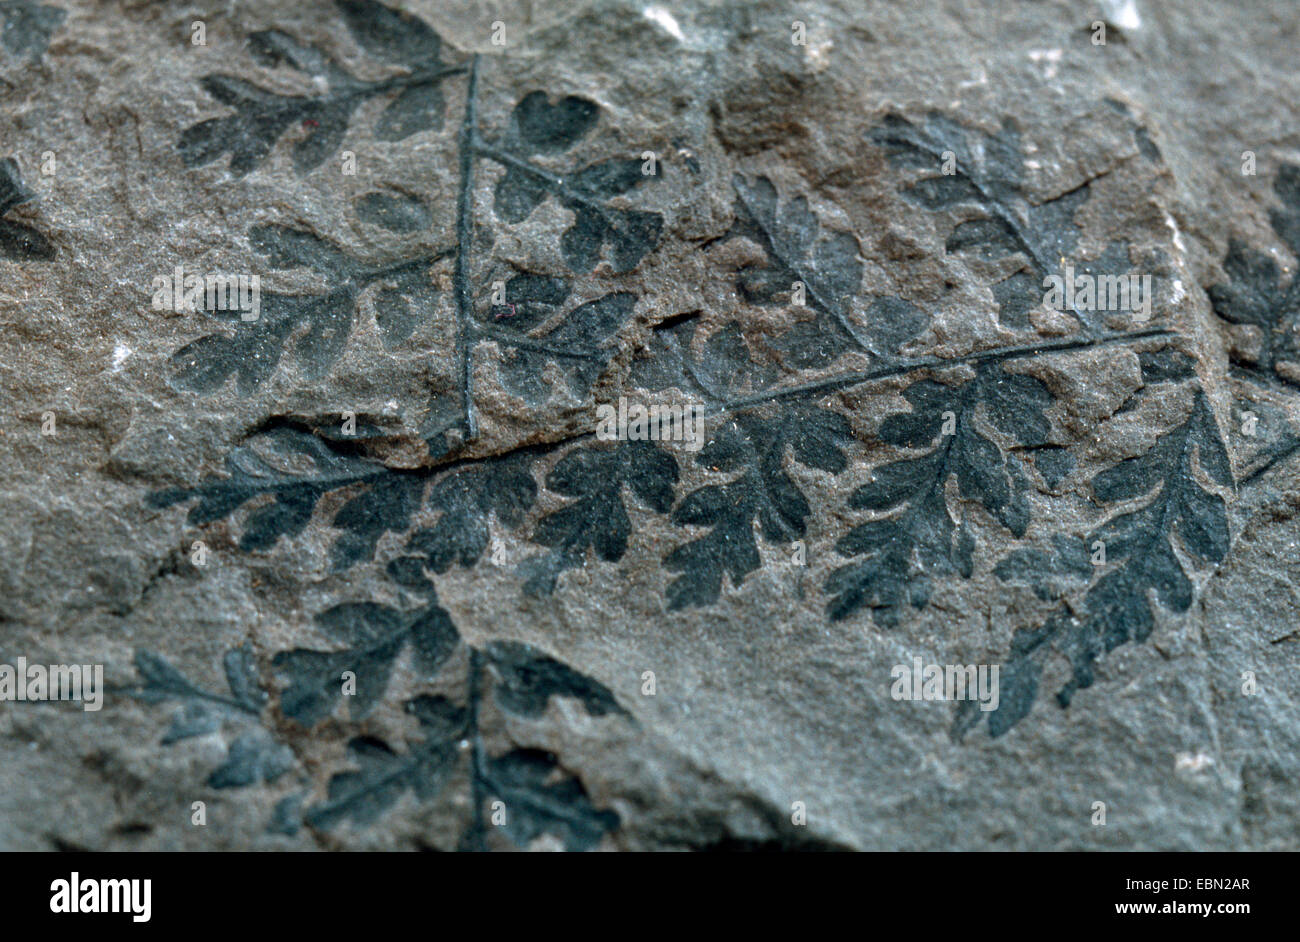 Sphenopteris spec., fossil seed fern, upper carbon, Germany Stock Photo